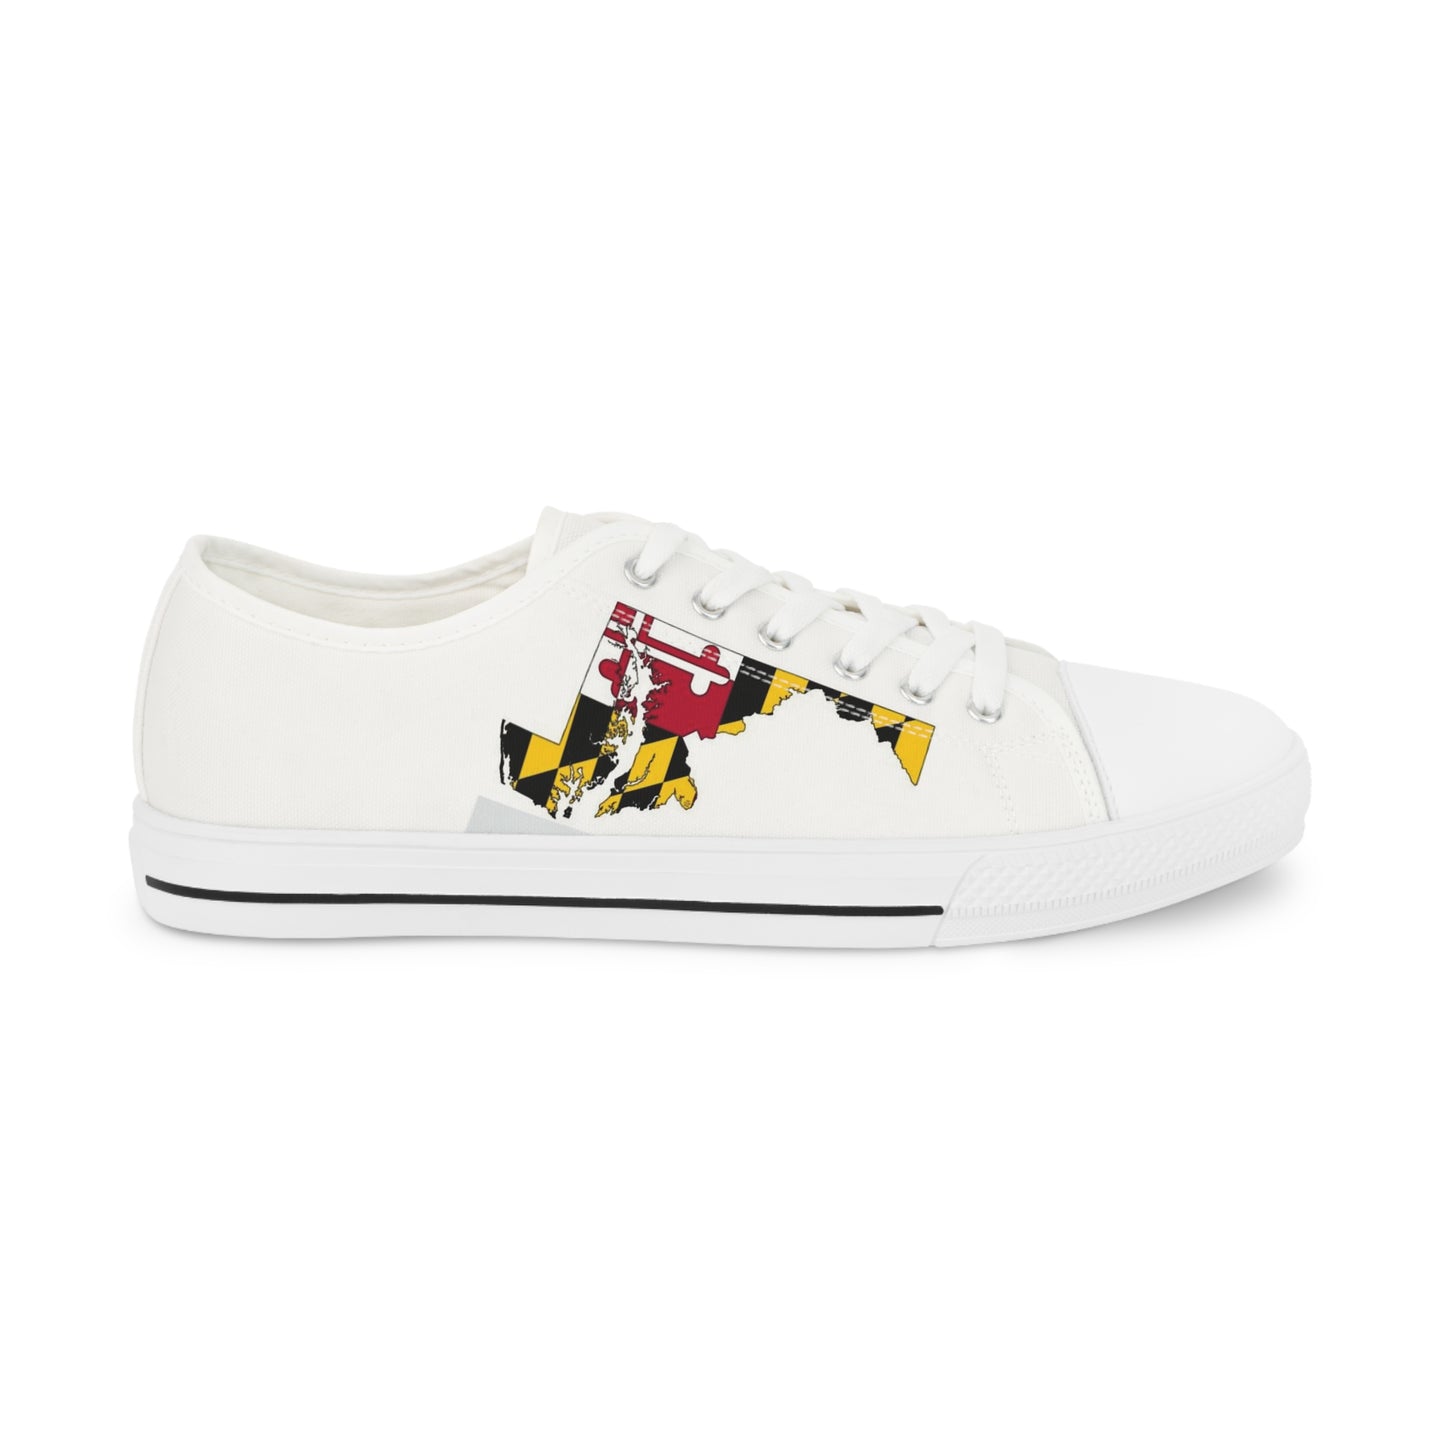 Maryland Men's Low Top Sneakers Black/White